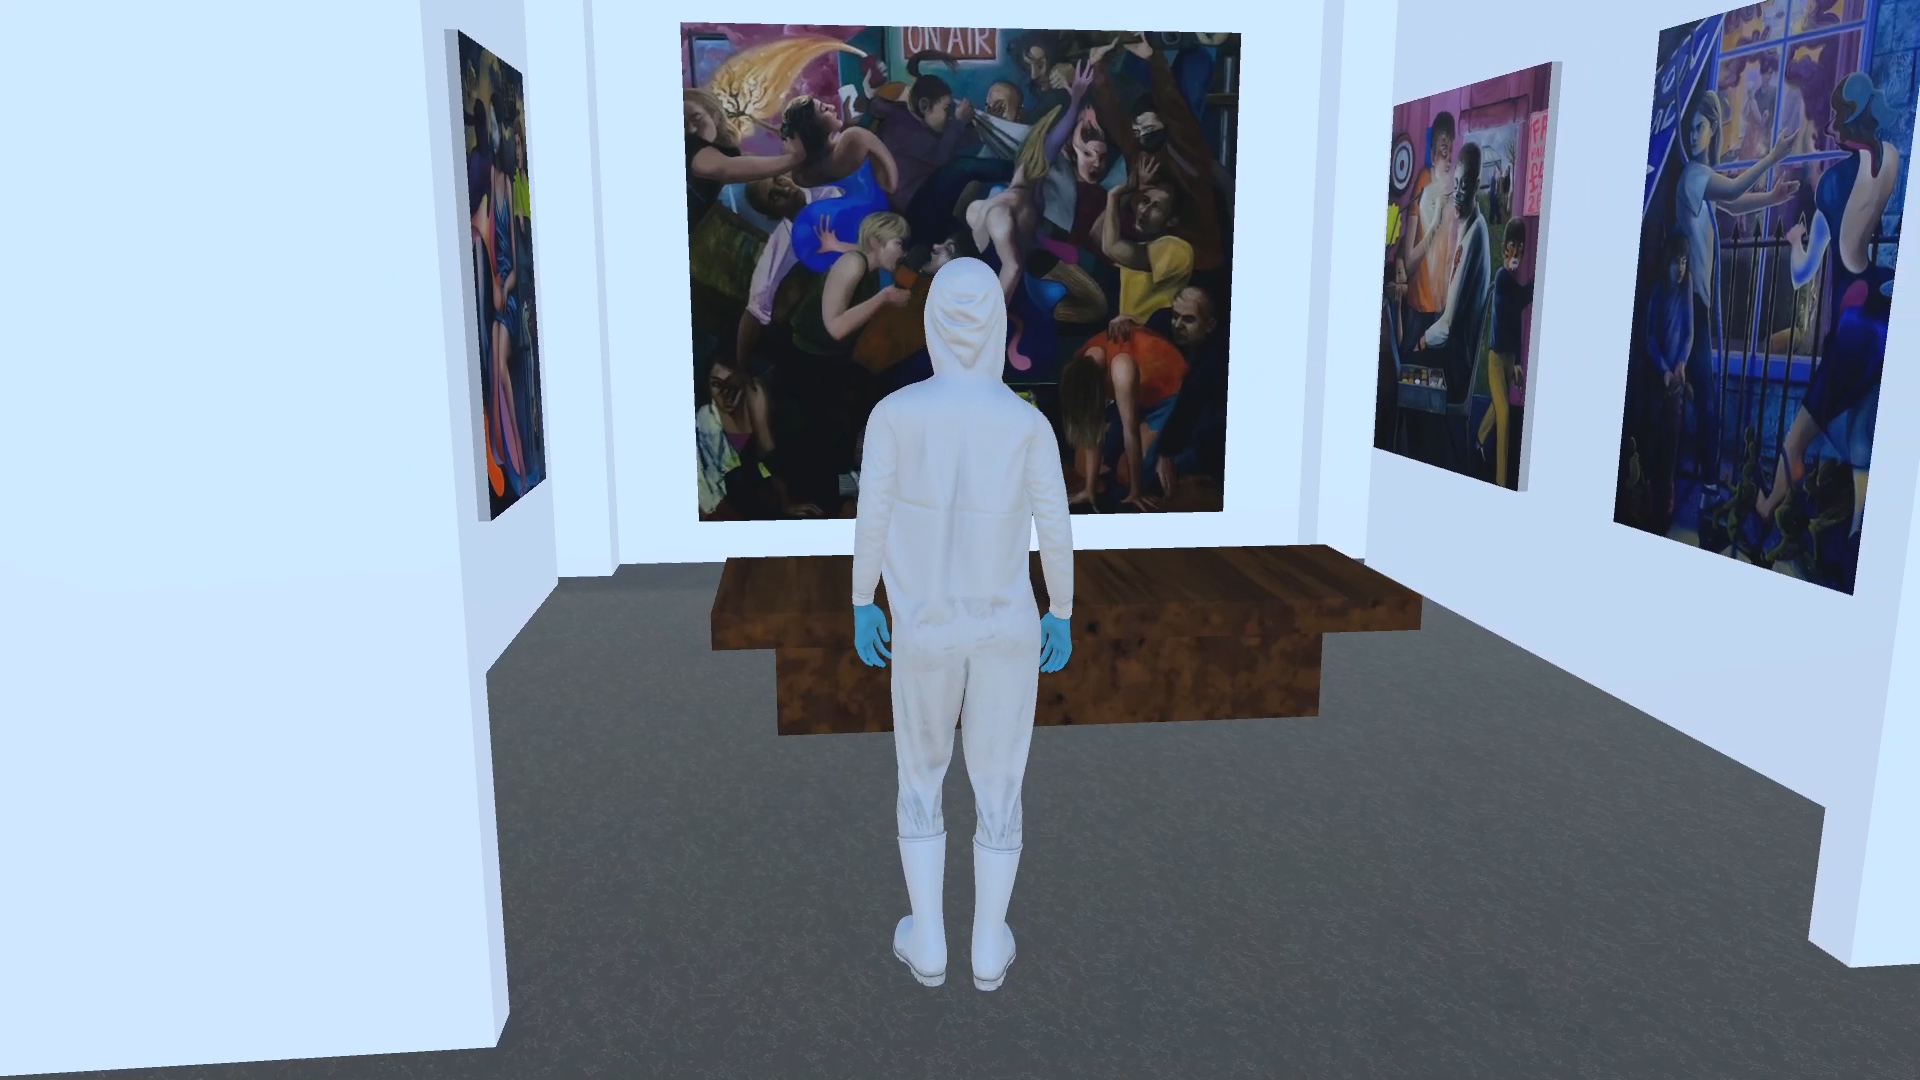 A virtual avatar standing in a 3D environment looking at paintings on the walls